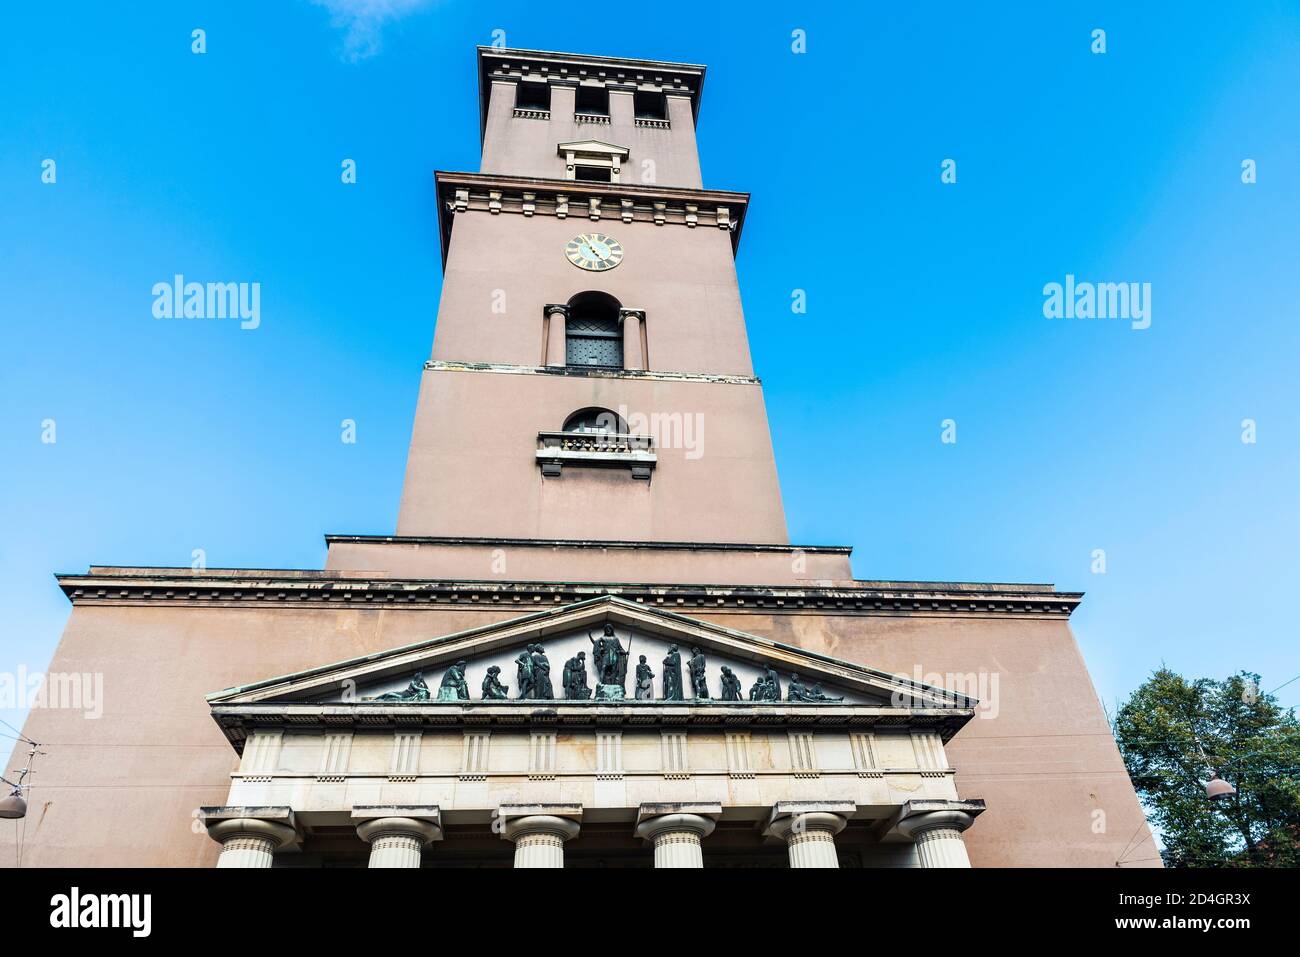 Facade of the The Church of Our Lady (Vor Frue Kirke), the cathedral of Copenhagen, on Frue Plads square in Copenhagen, Denmark Stock Photo